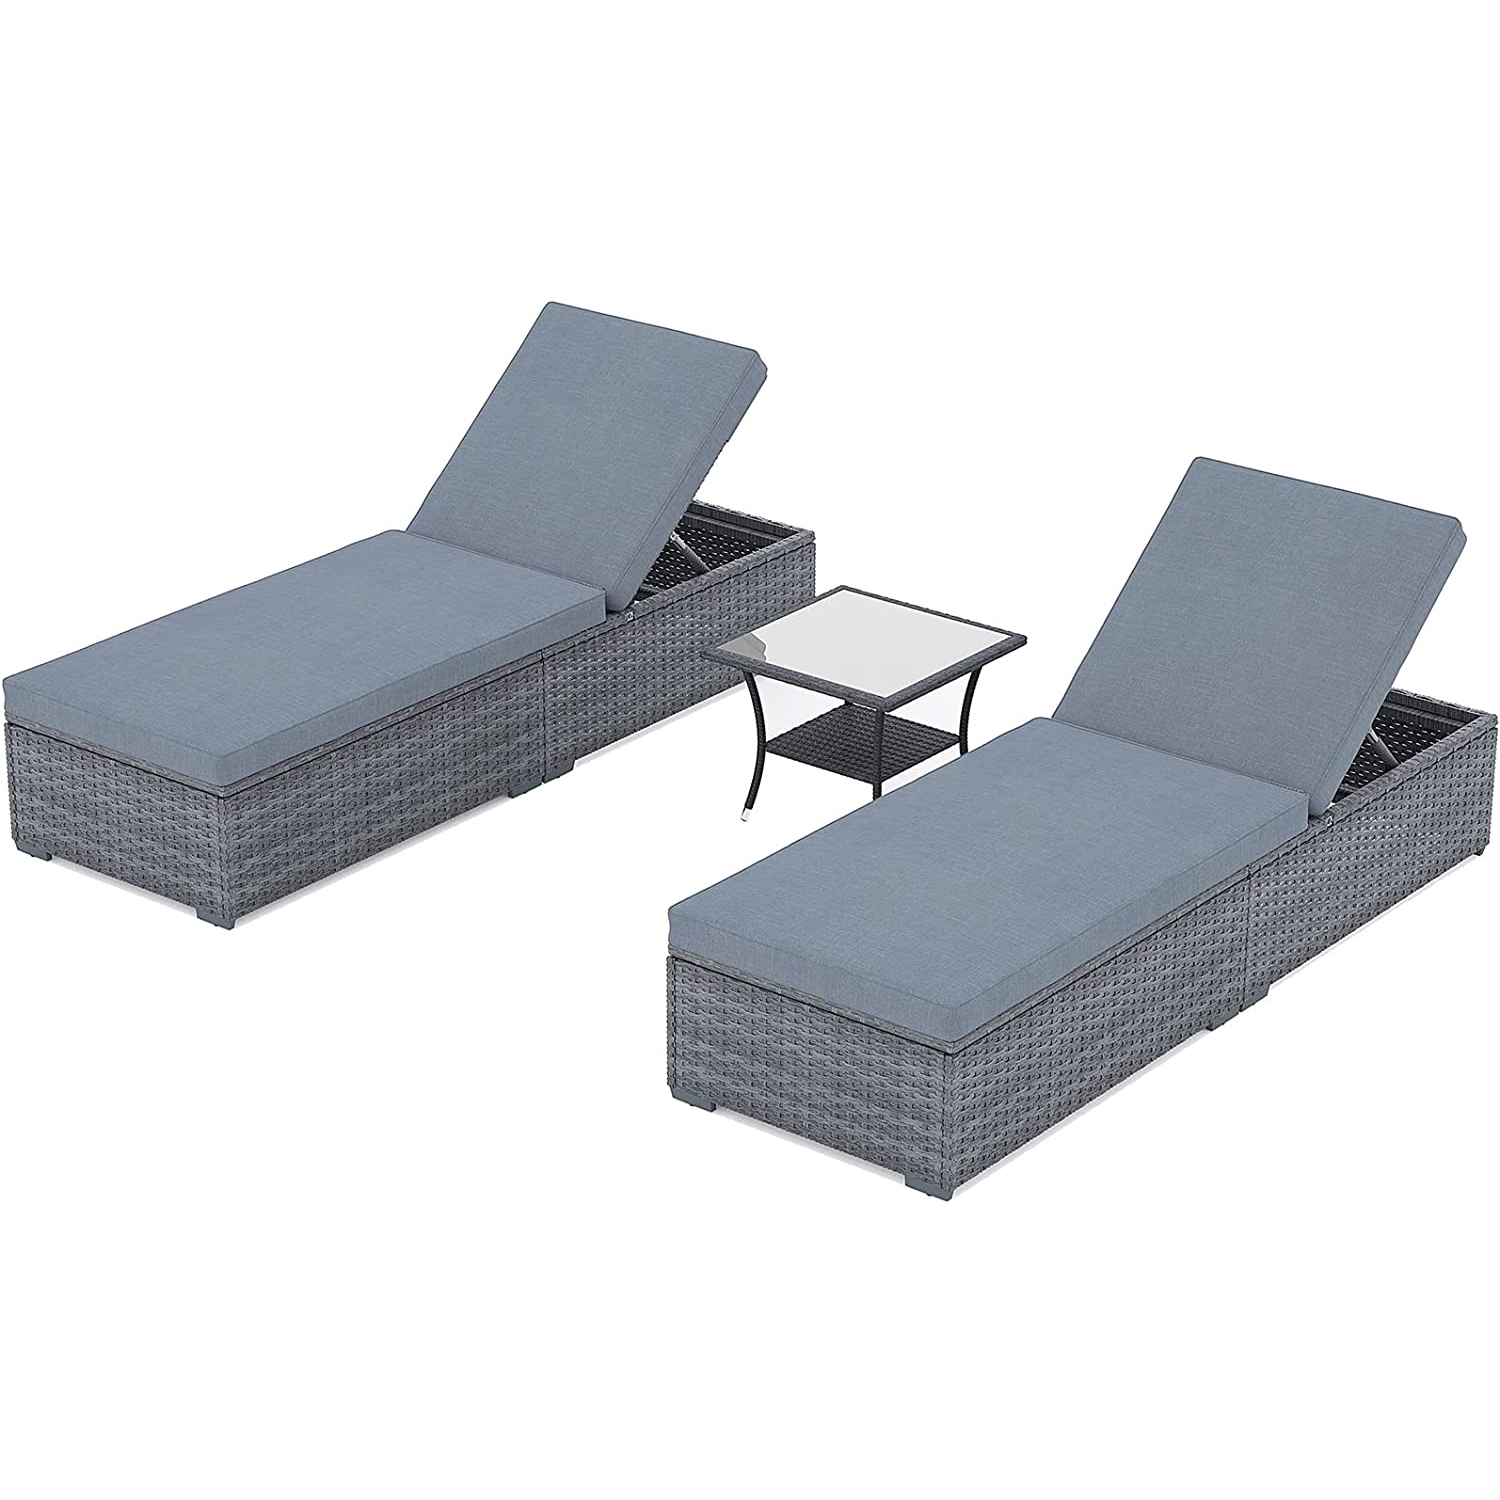 JOIVI Outdoor Chaise Lounge Chair, 3 Piece Patio Reclining Sun Lounger with Coffee Table, All Weather PE Rattan Adjustable Lounge Chair, Patio Pool Lounge Chairs with Removable Cushion, Grey - image 2 of 7